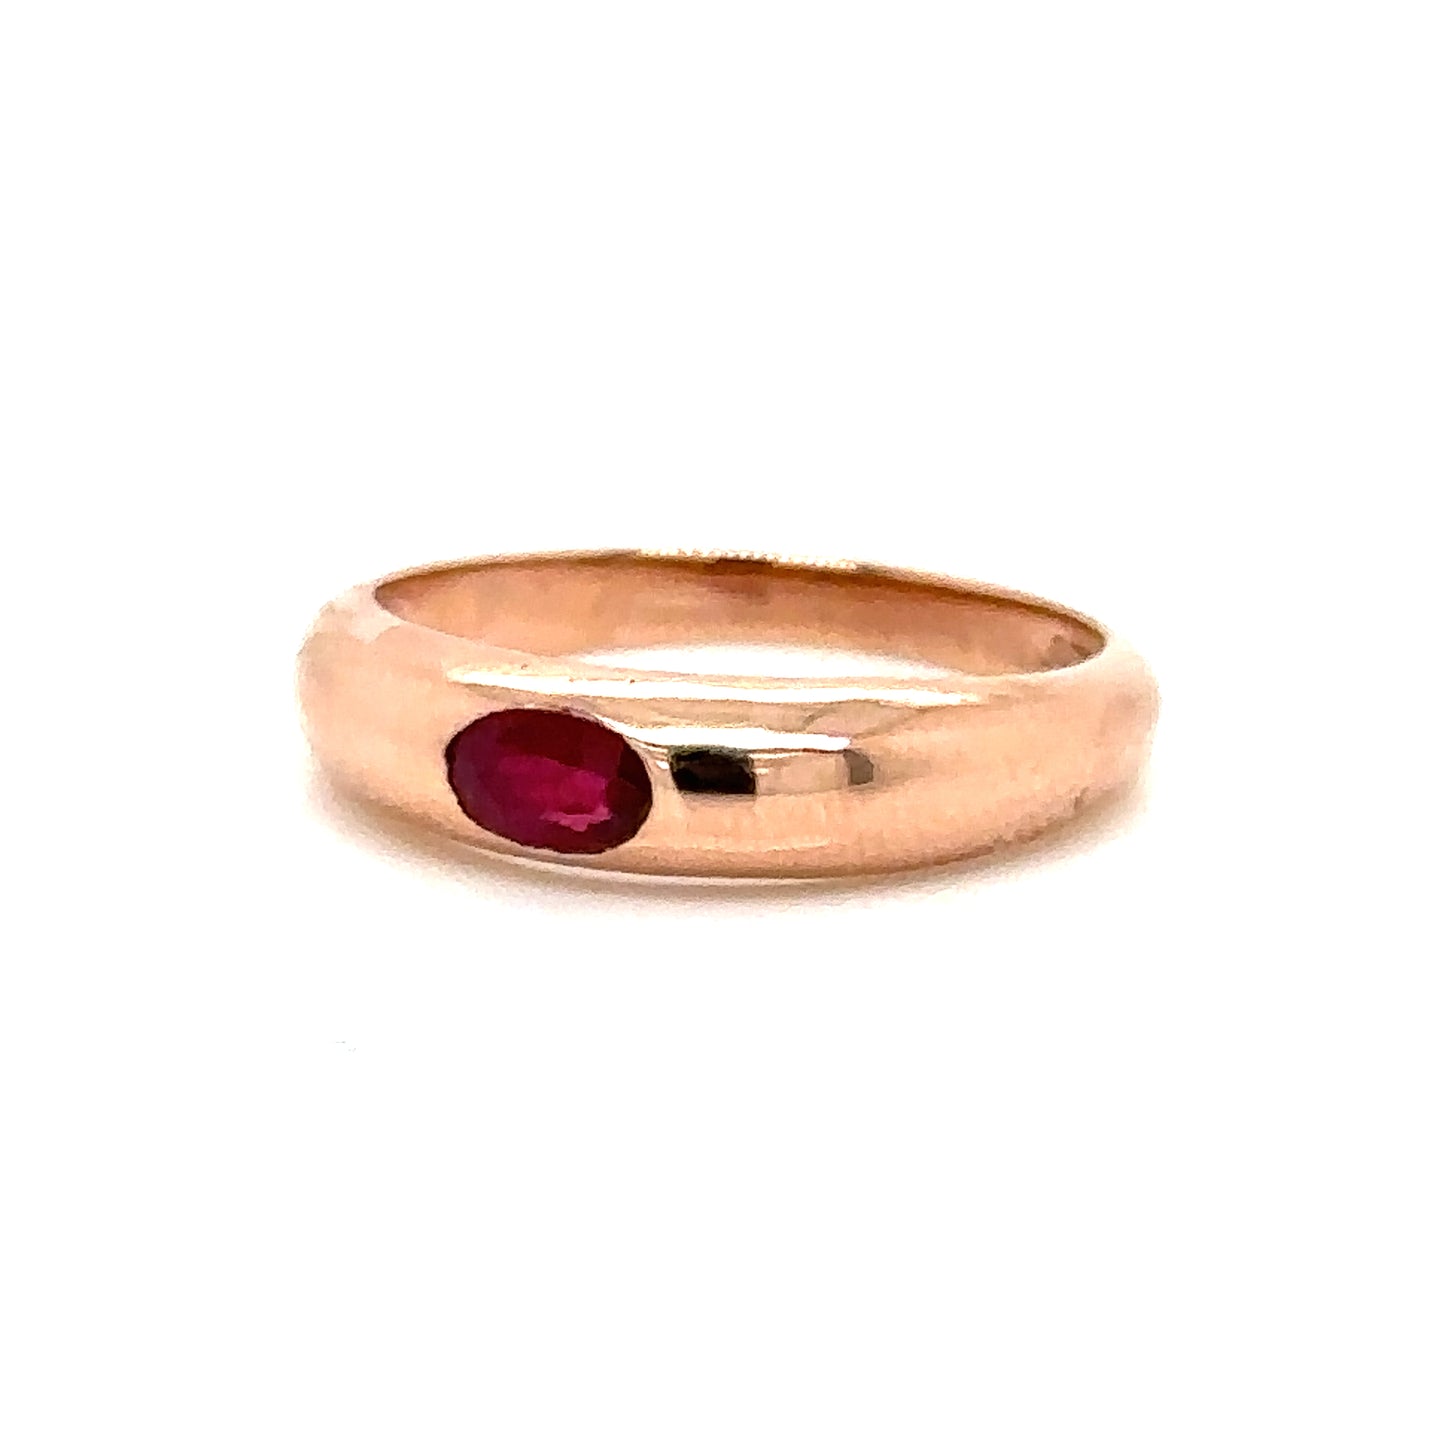 IMMEDIATE DELIVERY / Leonora Ring / 14k Rose Gold / Ruby / Size 5.5